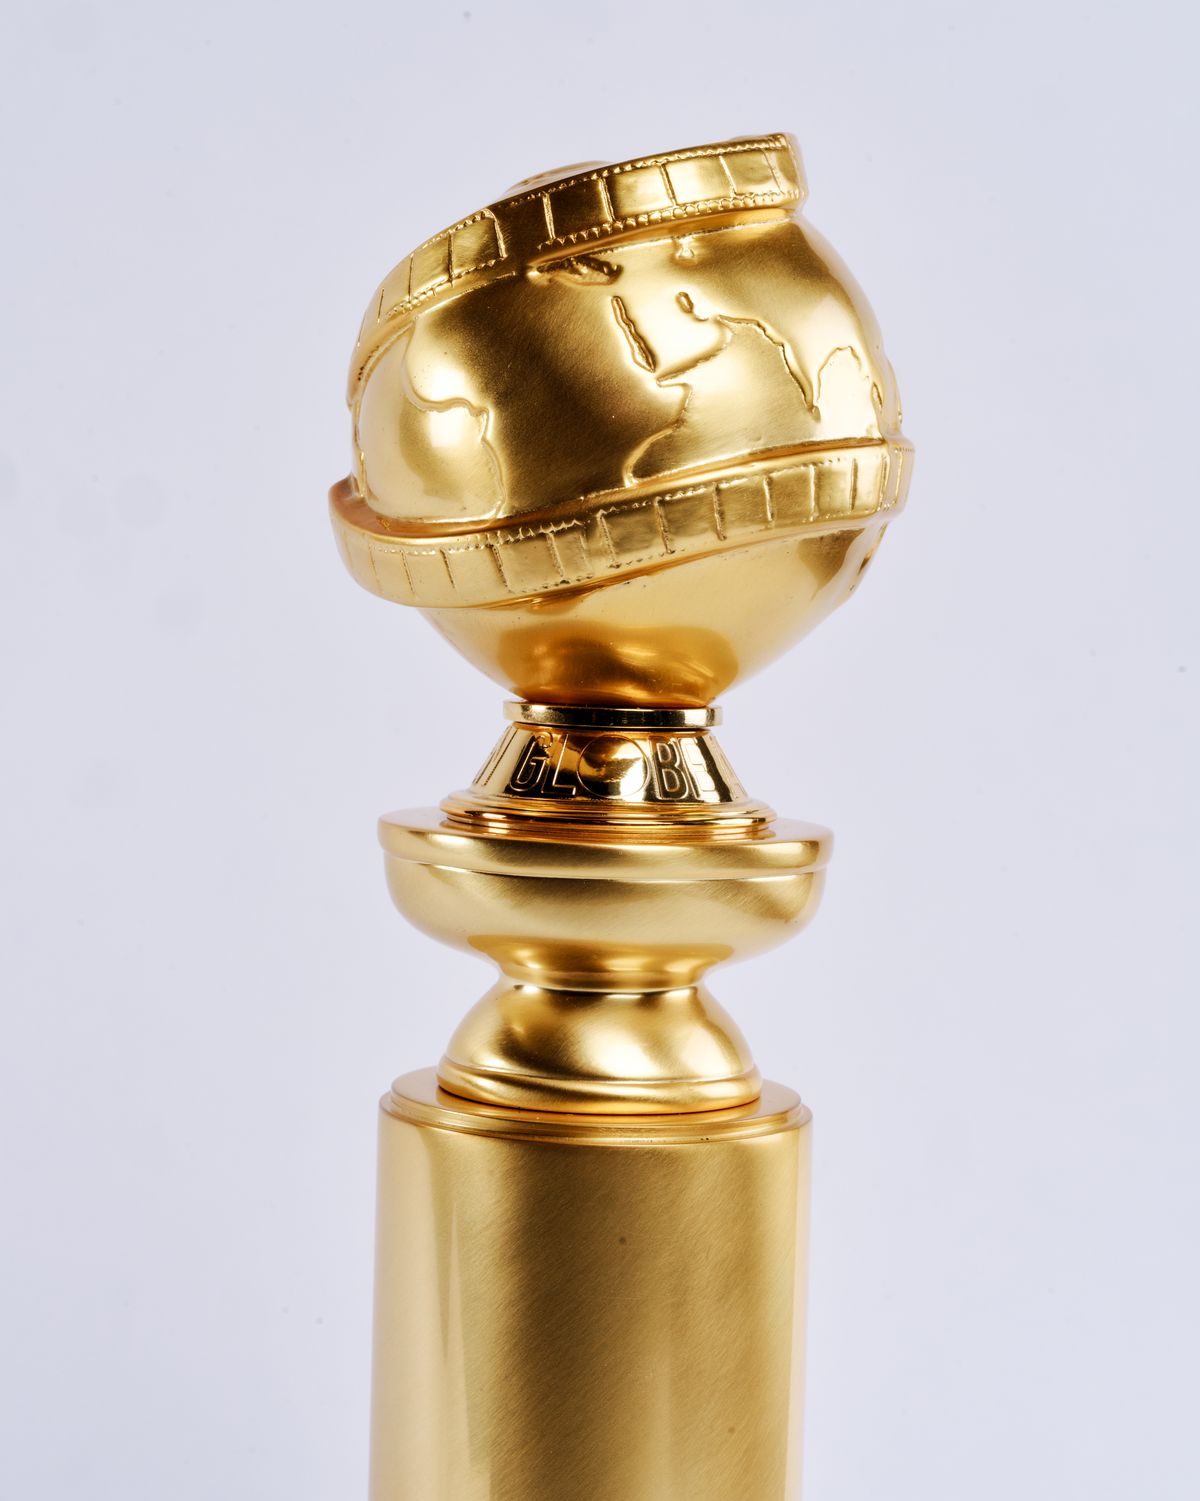 Announcements of the 81st Golden Globe Awards nominations